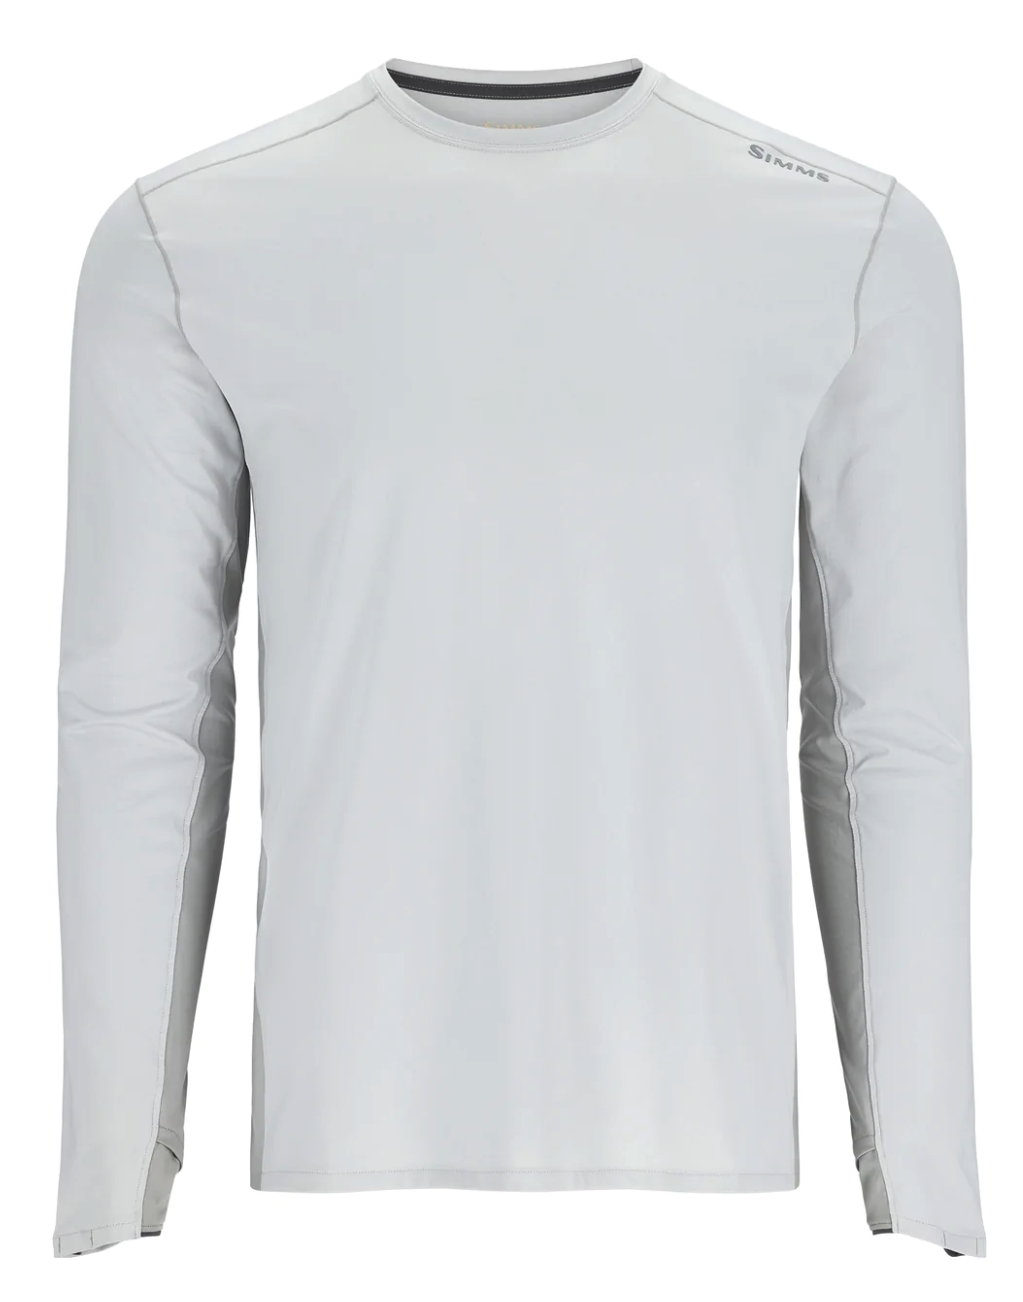 Simms Solarflex Crew, Simms Fly Fishing Shirts, Buy Online At The Fly  Fishers, Best Sun Protection Fishing Shirts